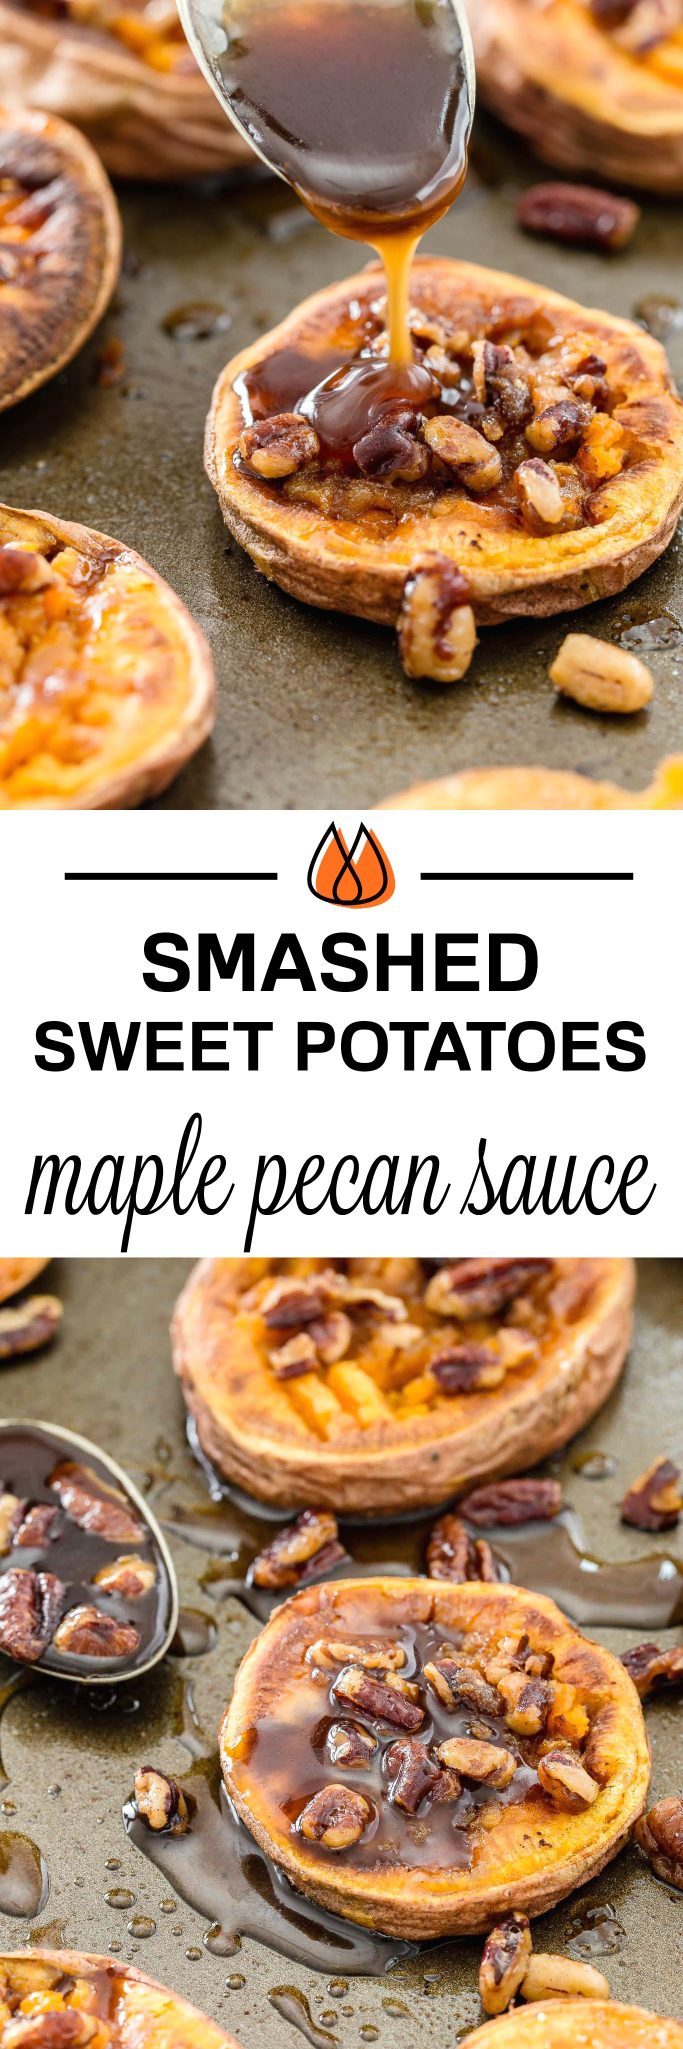 Delicious smashed sweet potatoes with maple pecan sauce - great for holidays!